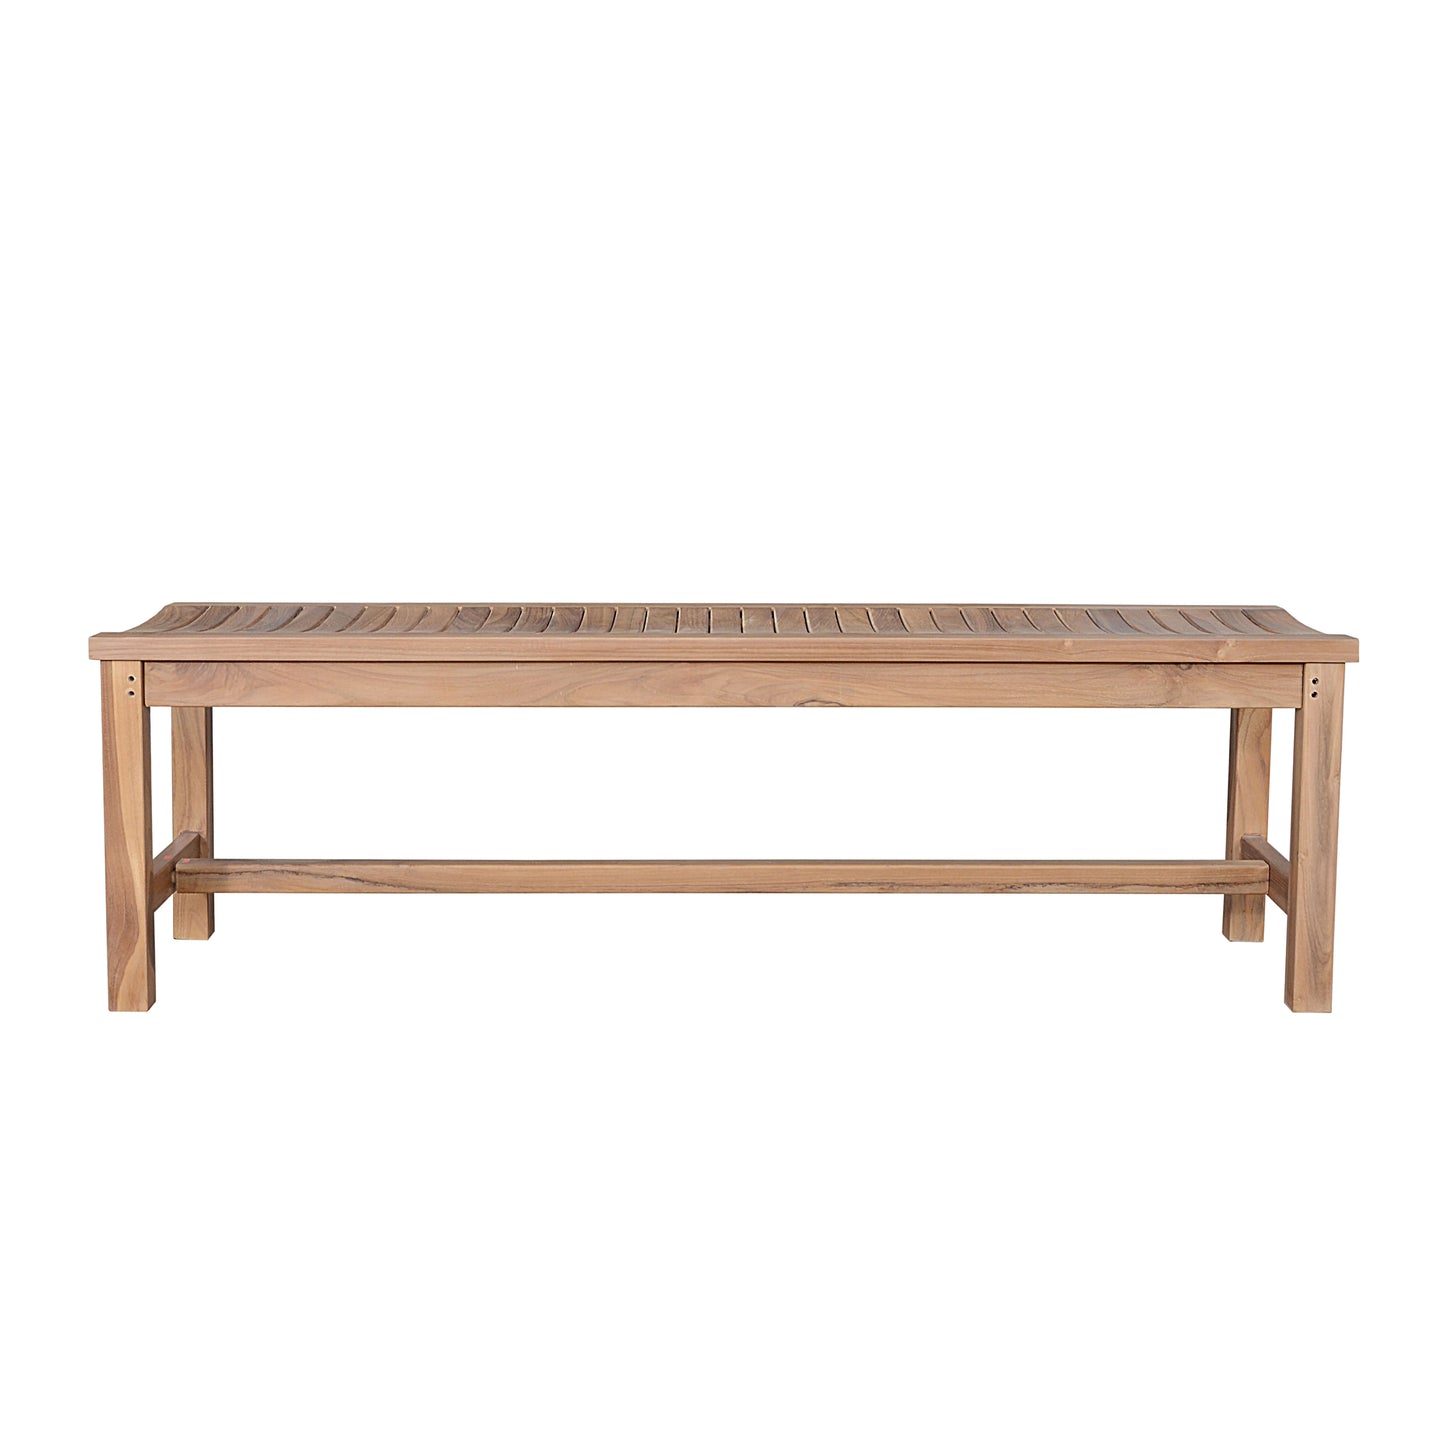 Madison 59" Backless Bench Bench Anderson   